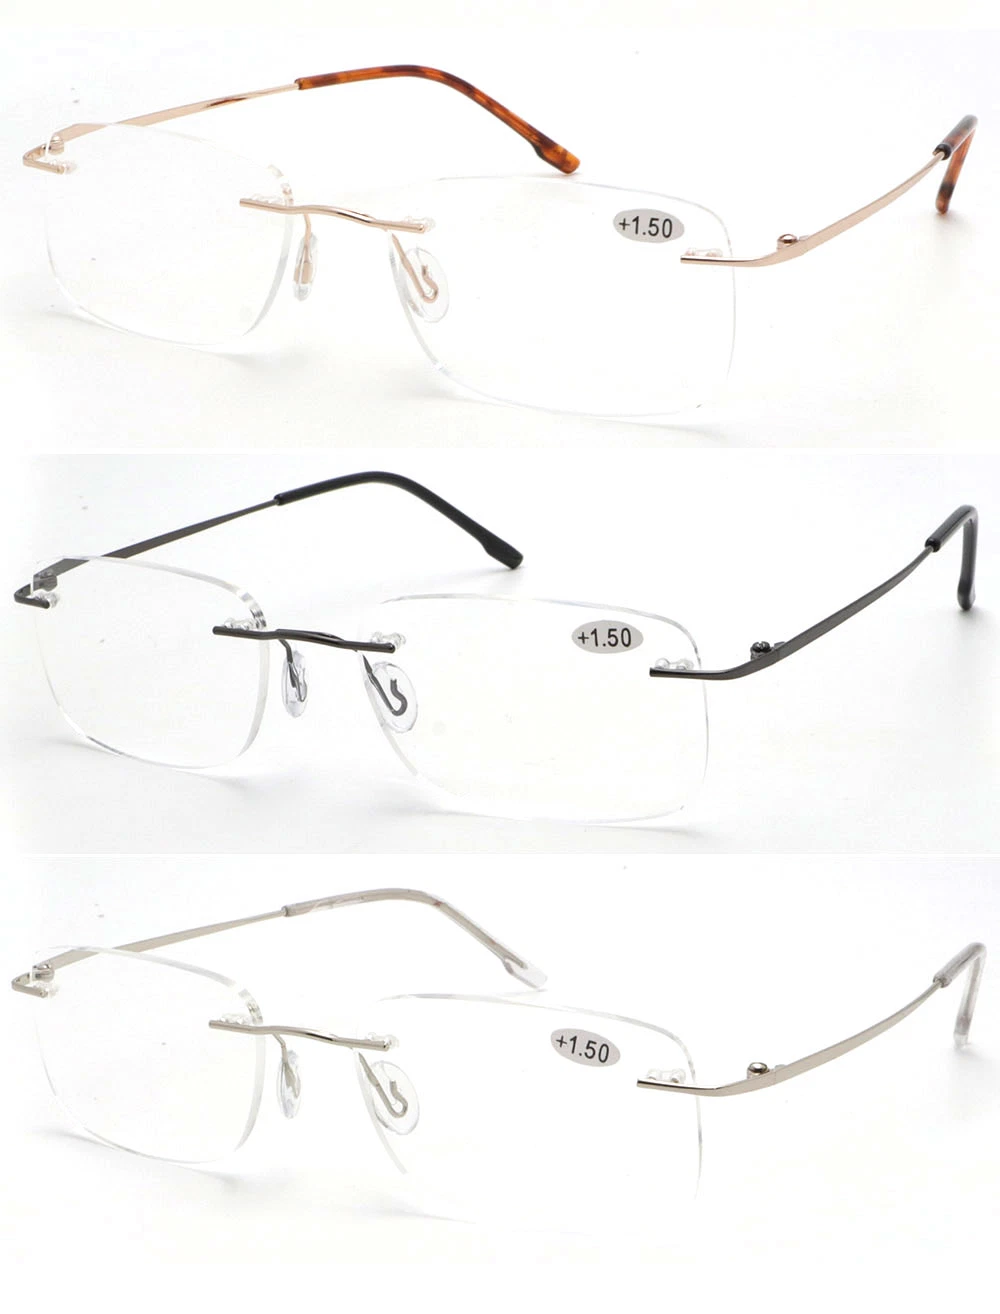 High Quality Rimless Reading Glasses Anti Blue Light Fashion Metal Reading Glasses Unisex in Stock